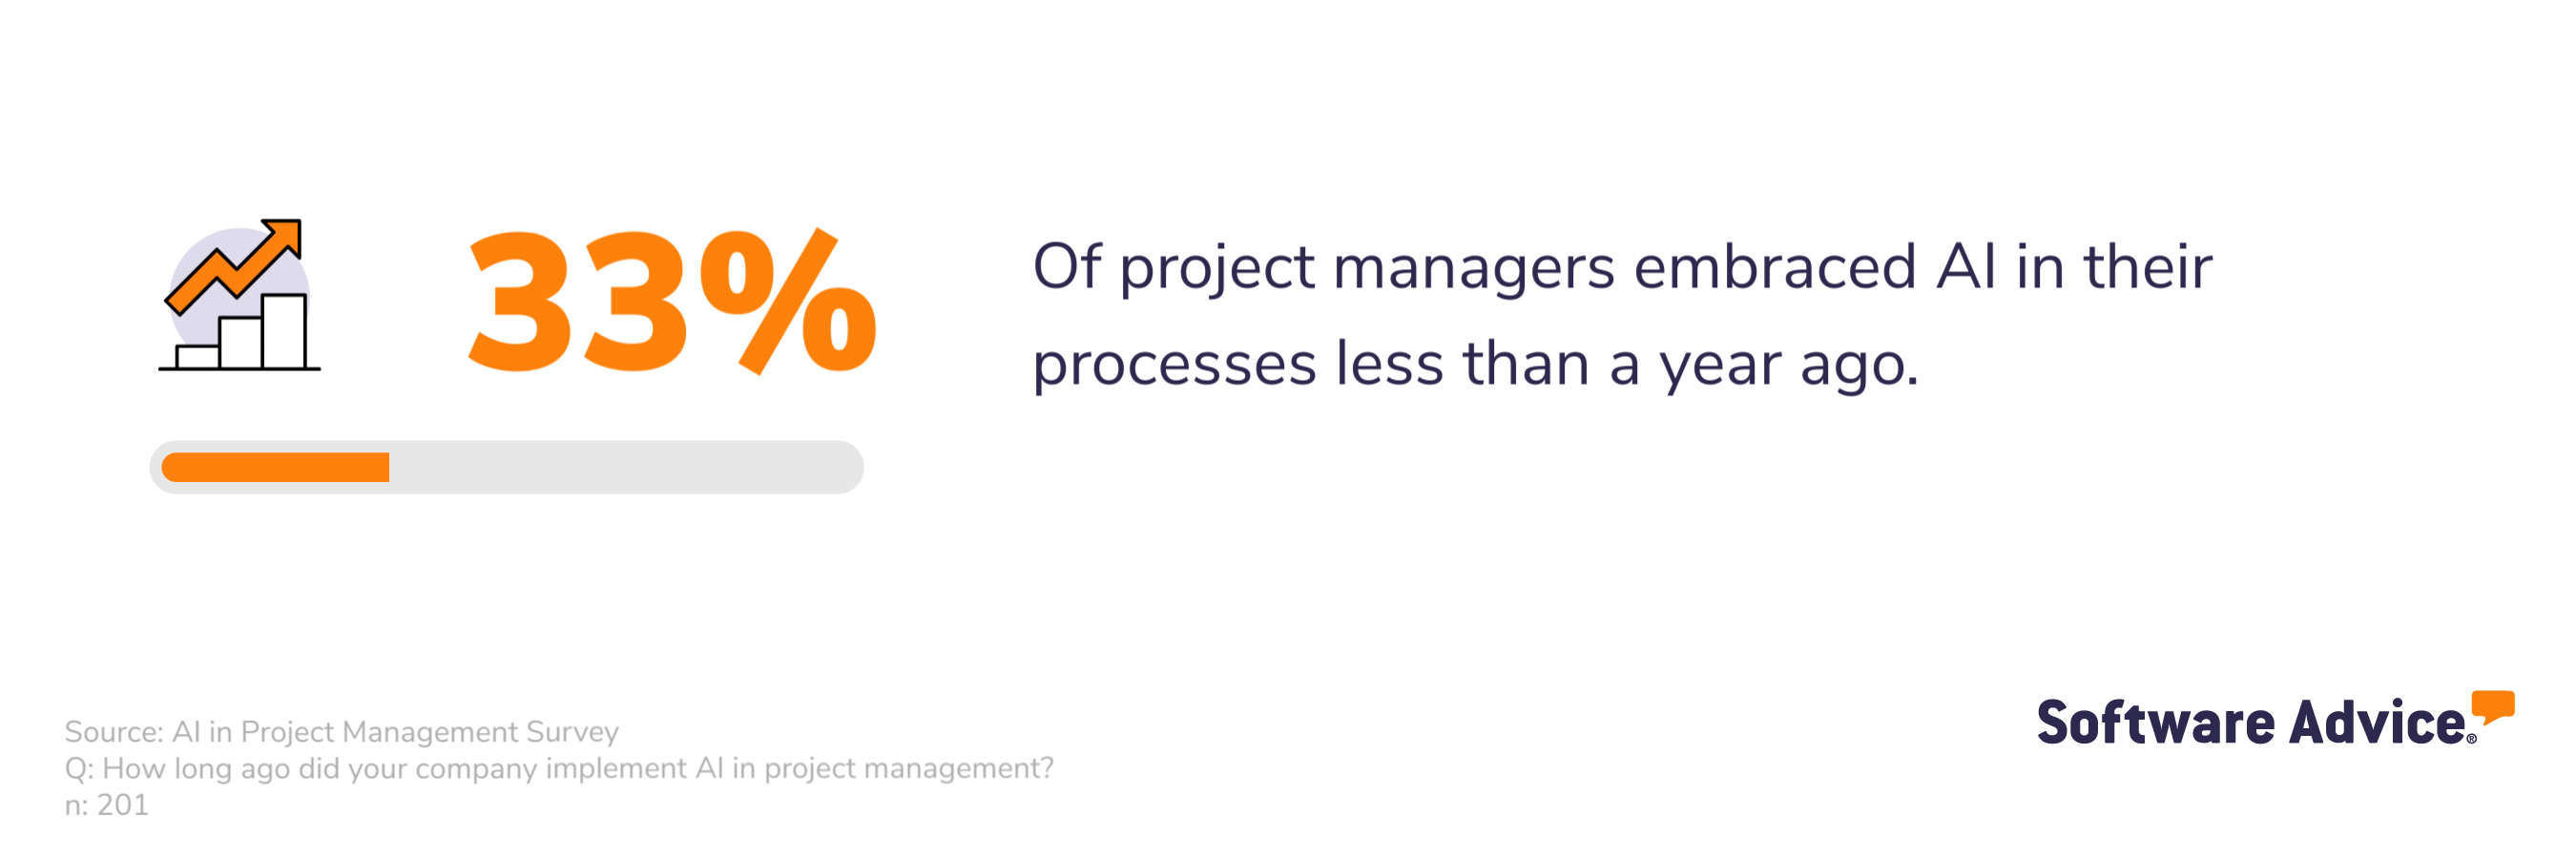 SA graphic: 33% of project managers embraced AI in their processes less than a year ago.